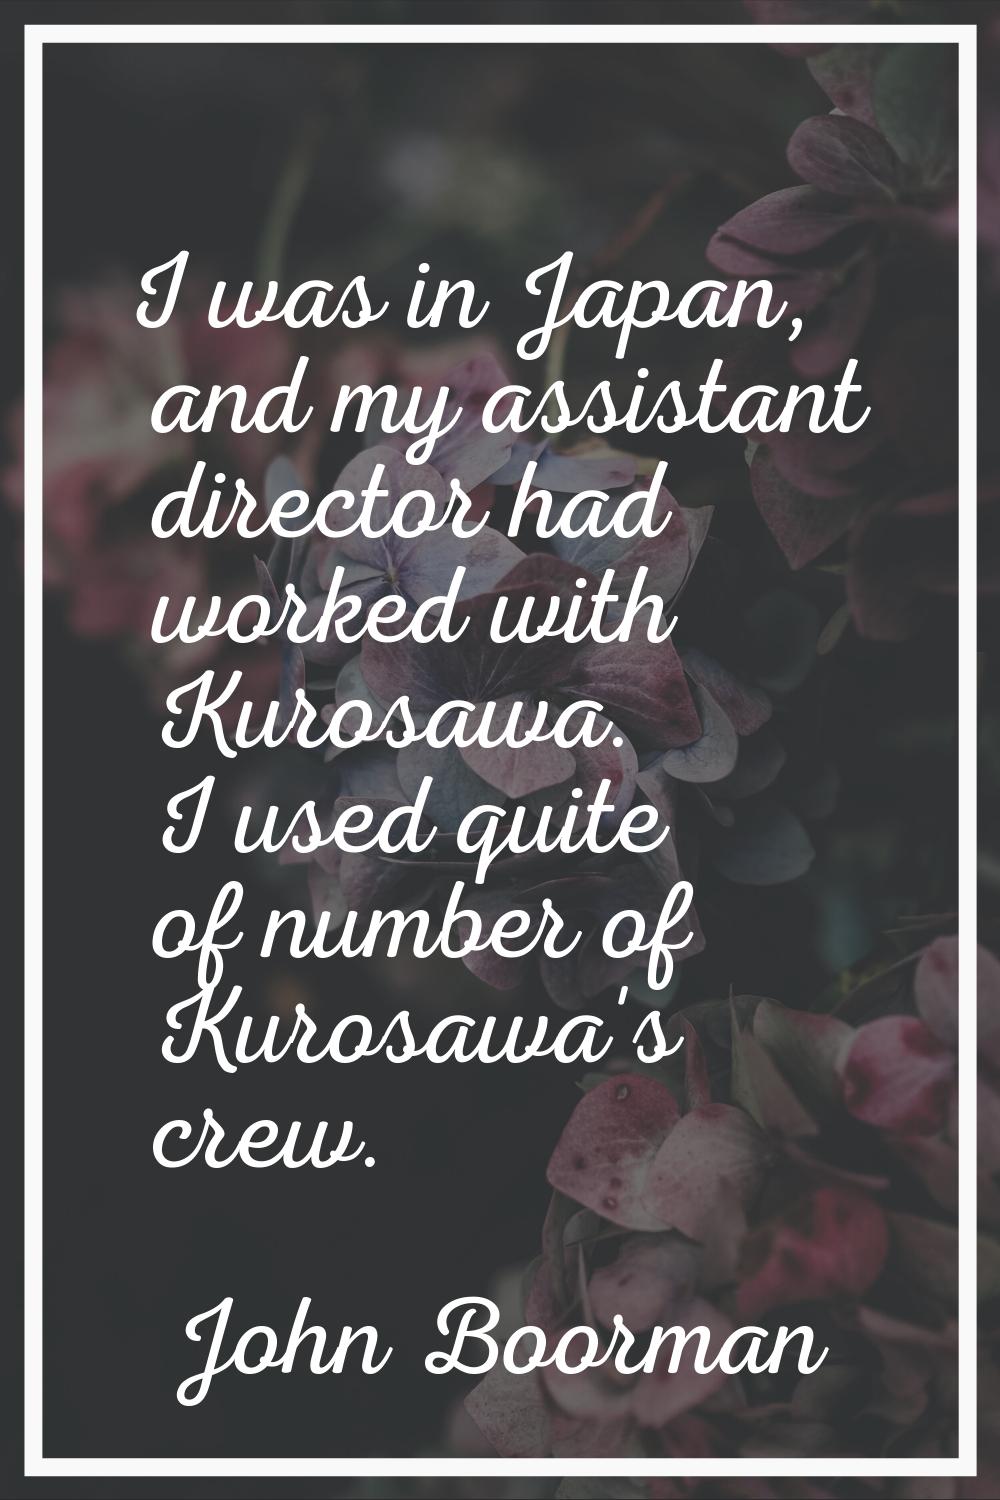 I was in Japan, and my assistant director had worked with Kurosawa. I used quite of number of Kuros